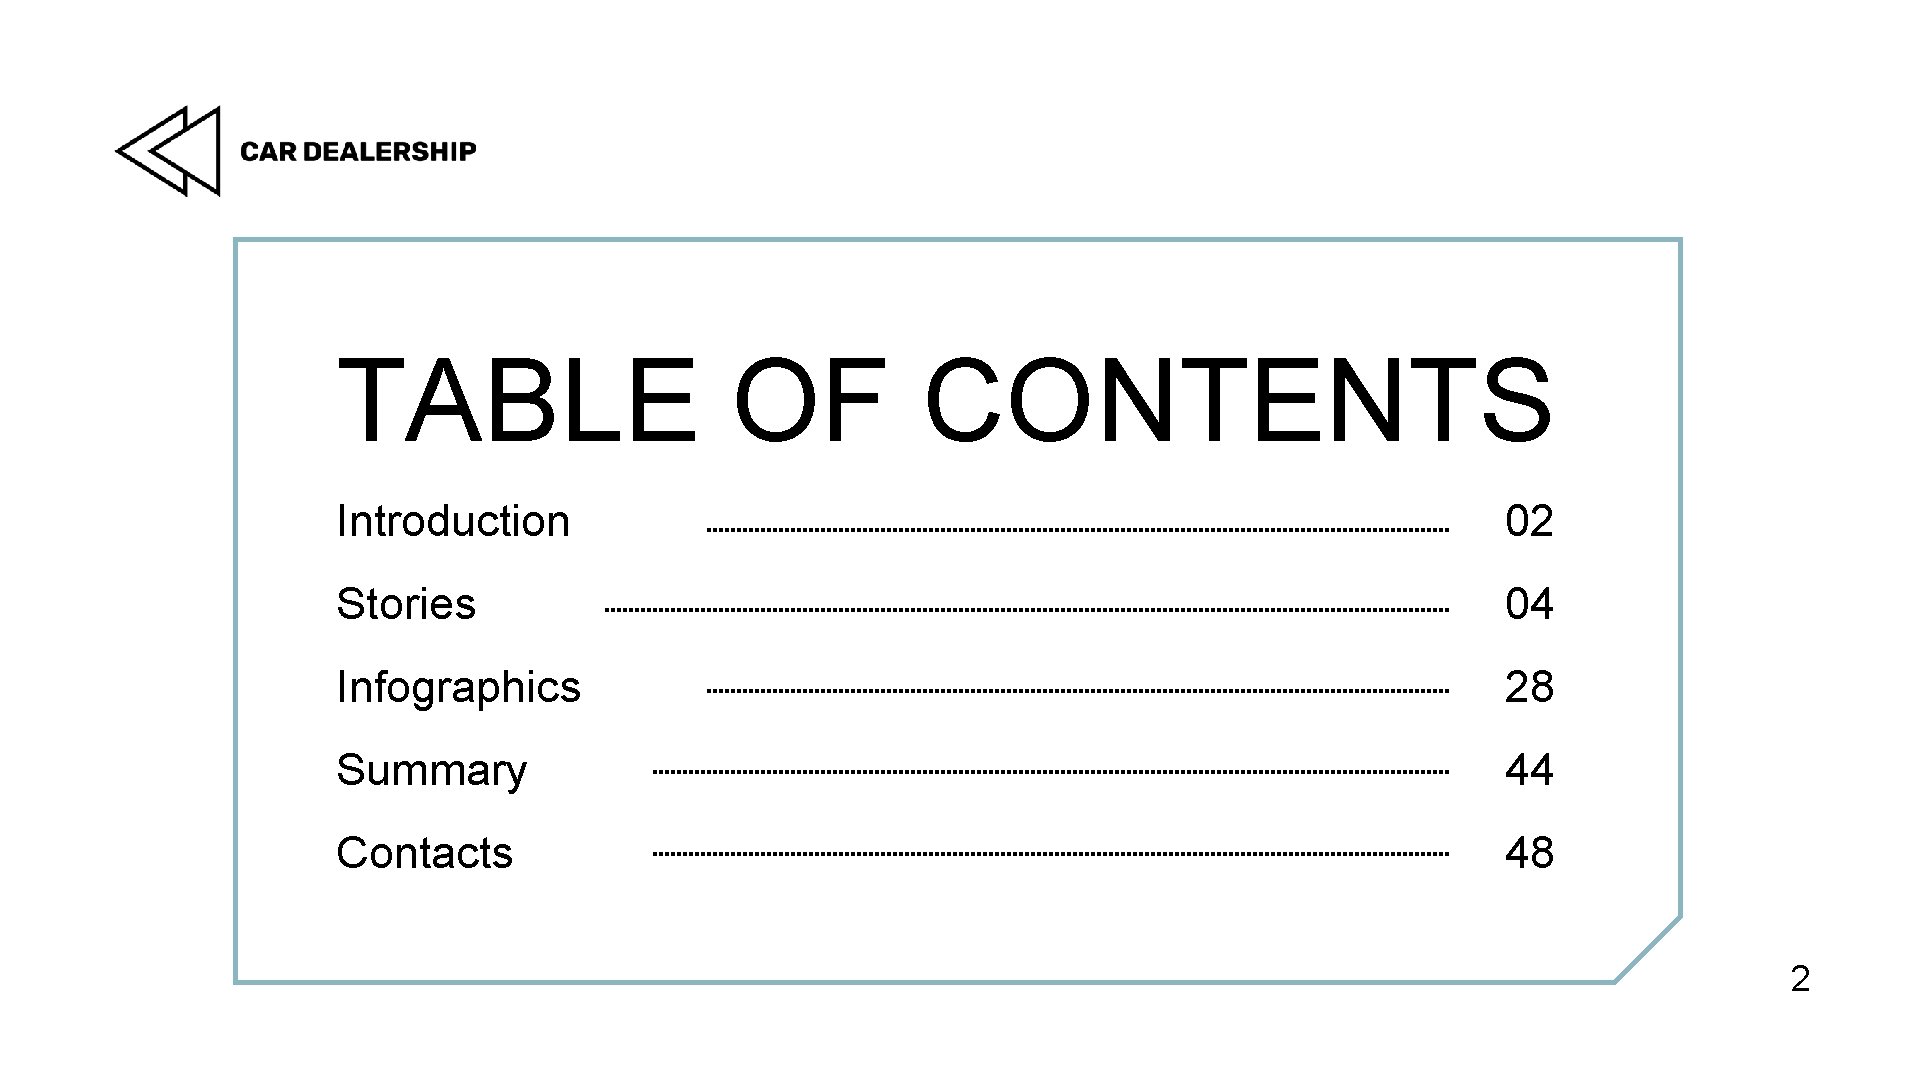 TABLE OF CONTENTS Introduction 02 Stories 04 Infographics 28 Summary 44 Contacts 48 2